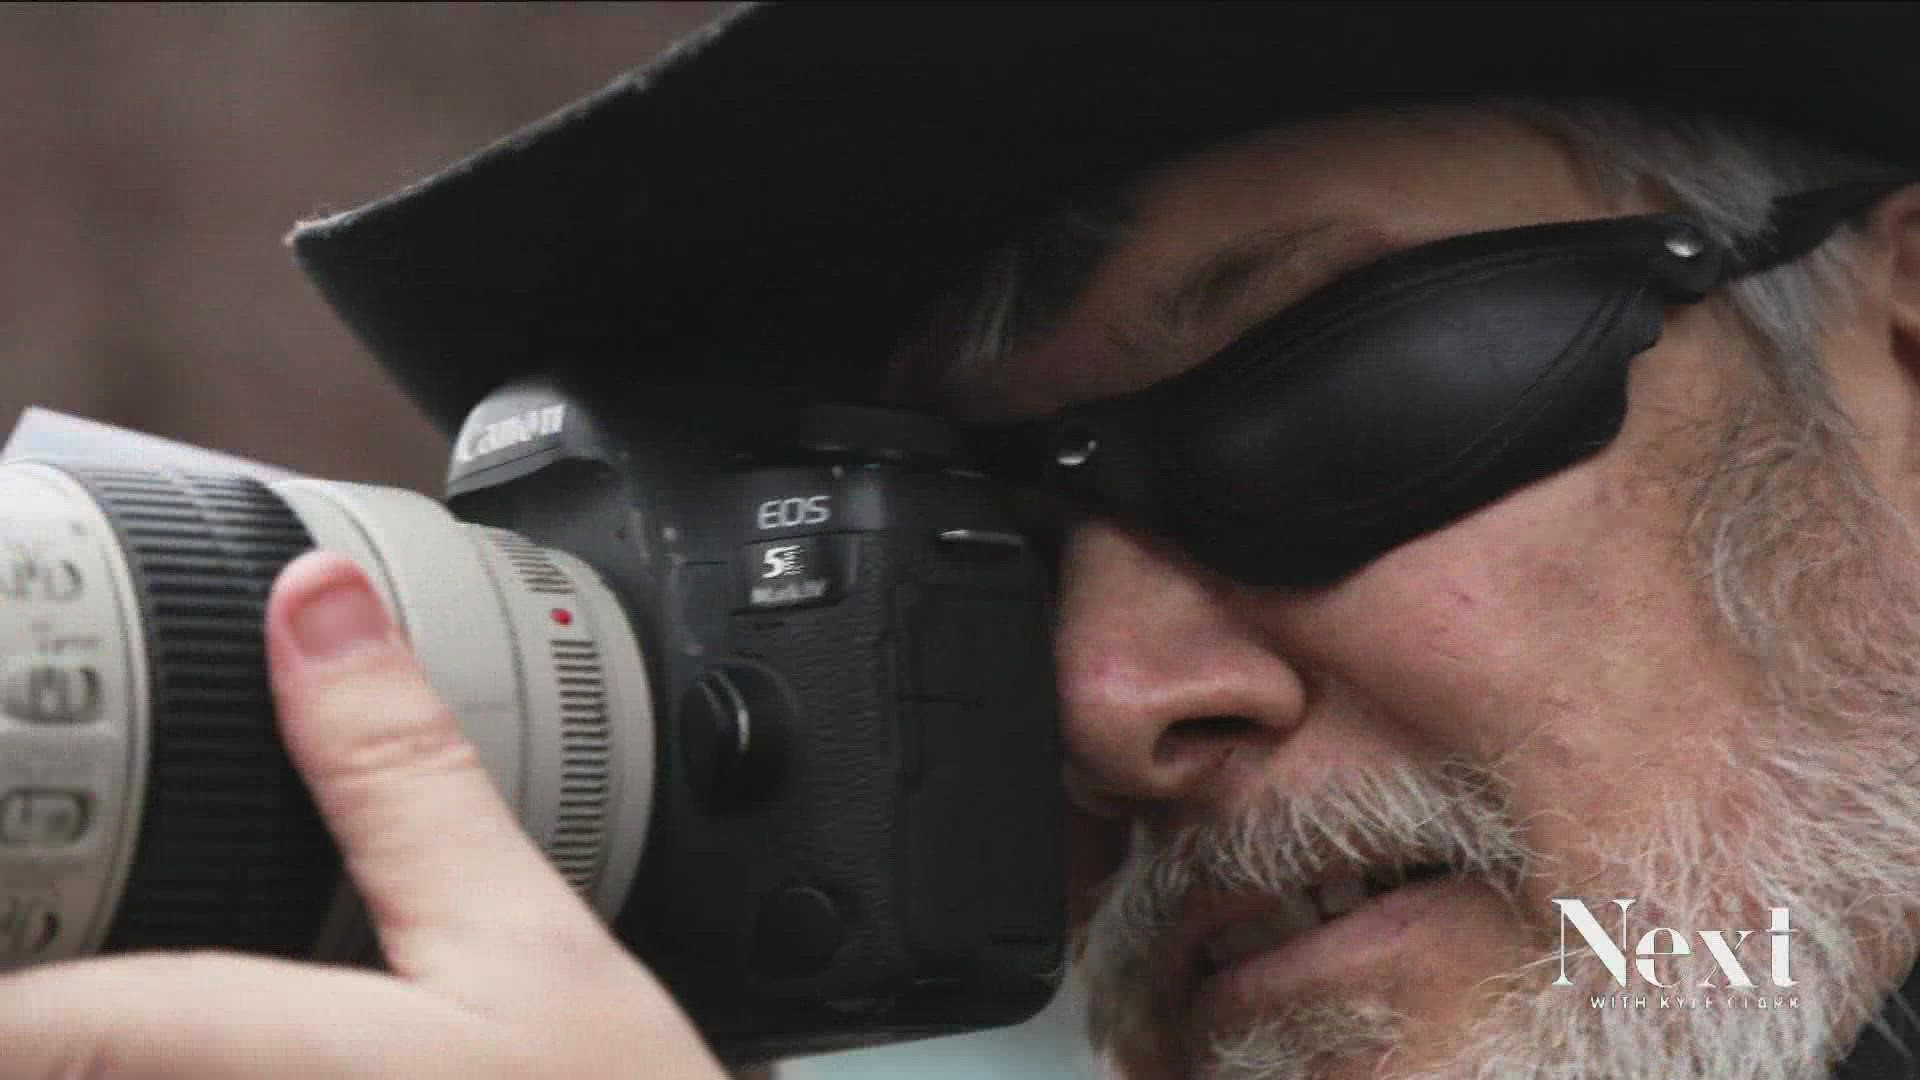 Hans Watson suffered a stroke that left him blind several years ago. He has regained sight in one eye and uses photography as a form of rehab.